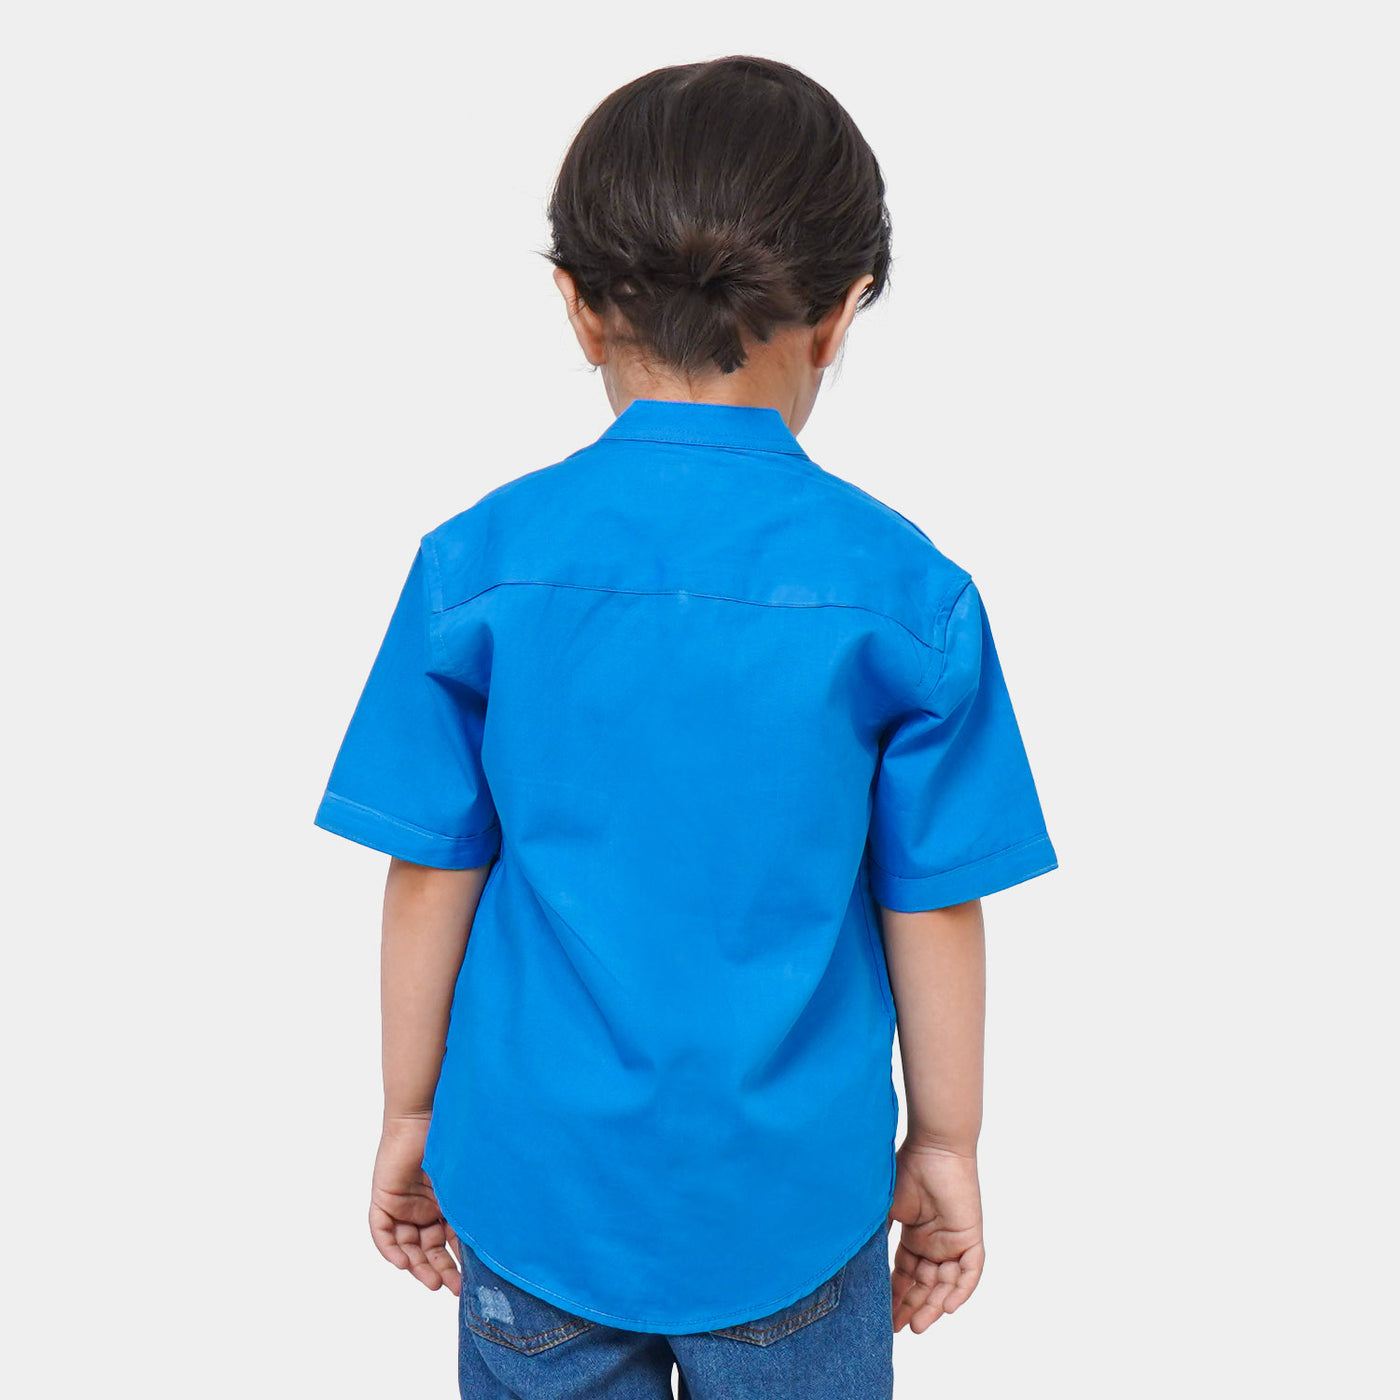 Boys Cotton Casual Shirt What's Up | Royal Blue